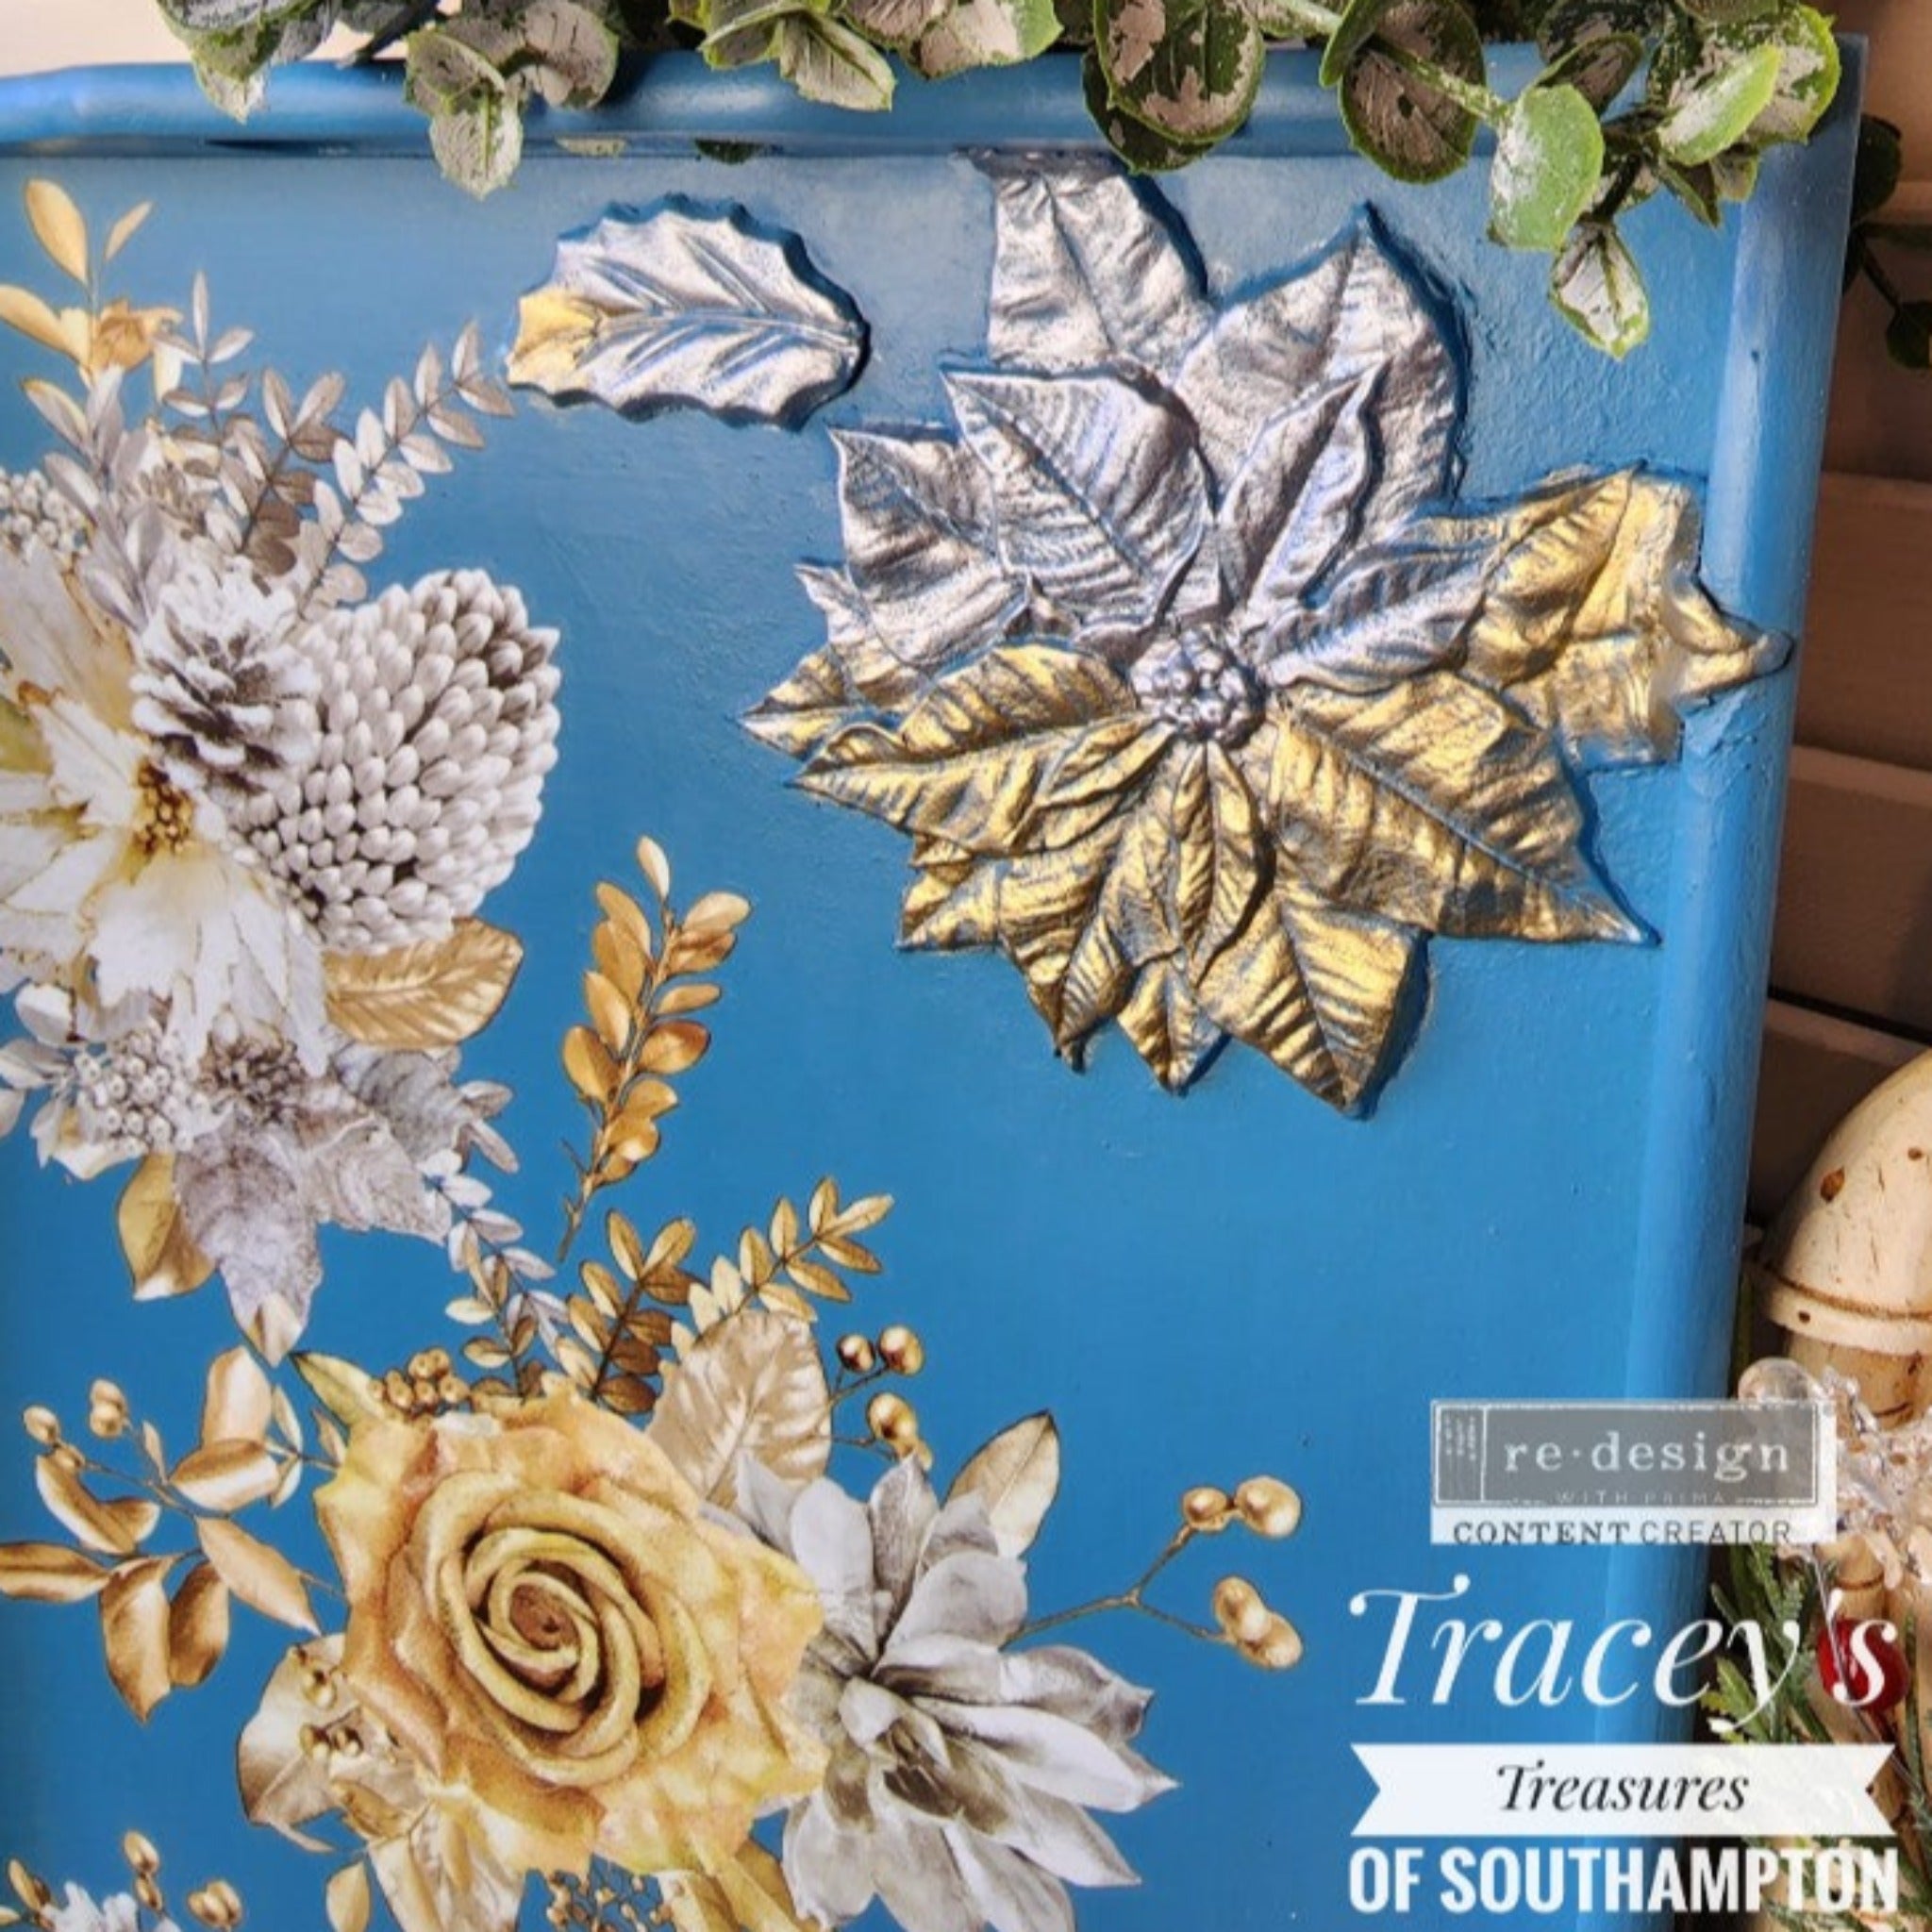 A close-up of a wood serving tray refurbished by Tracey's Treasures of Southampton is painted blue and features ReDesign with Prima's Perfect Poinsettia silicone mould casting in silver and gold colors at the top right inside the tray. ReDesign with Prima's A Gilded Moment floral transfer is also featured on the tray.